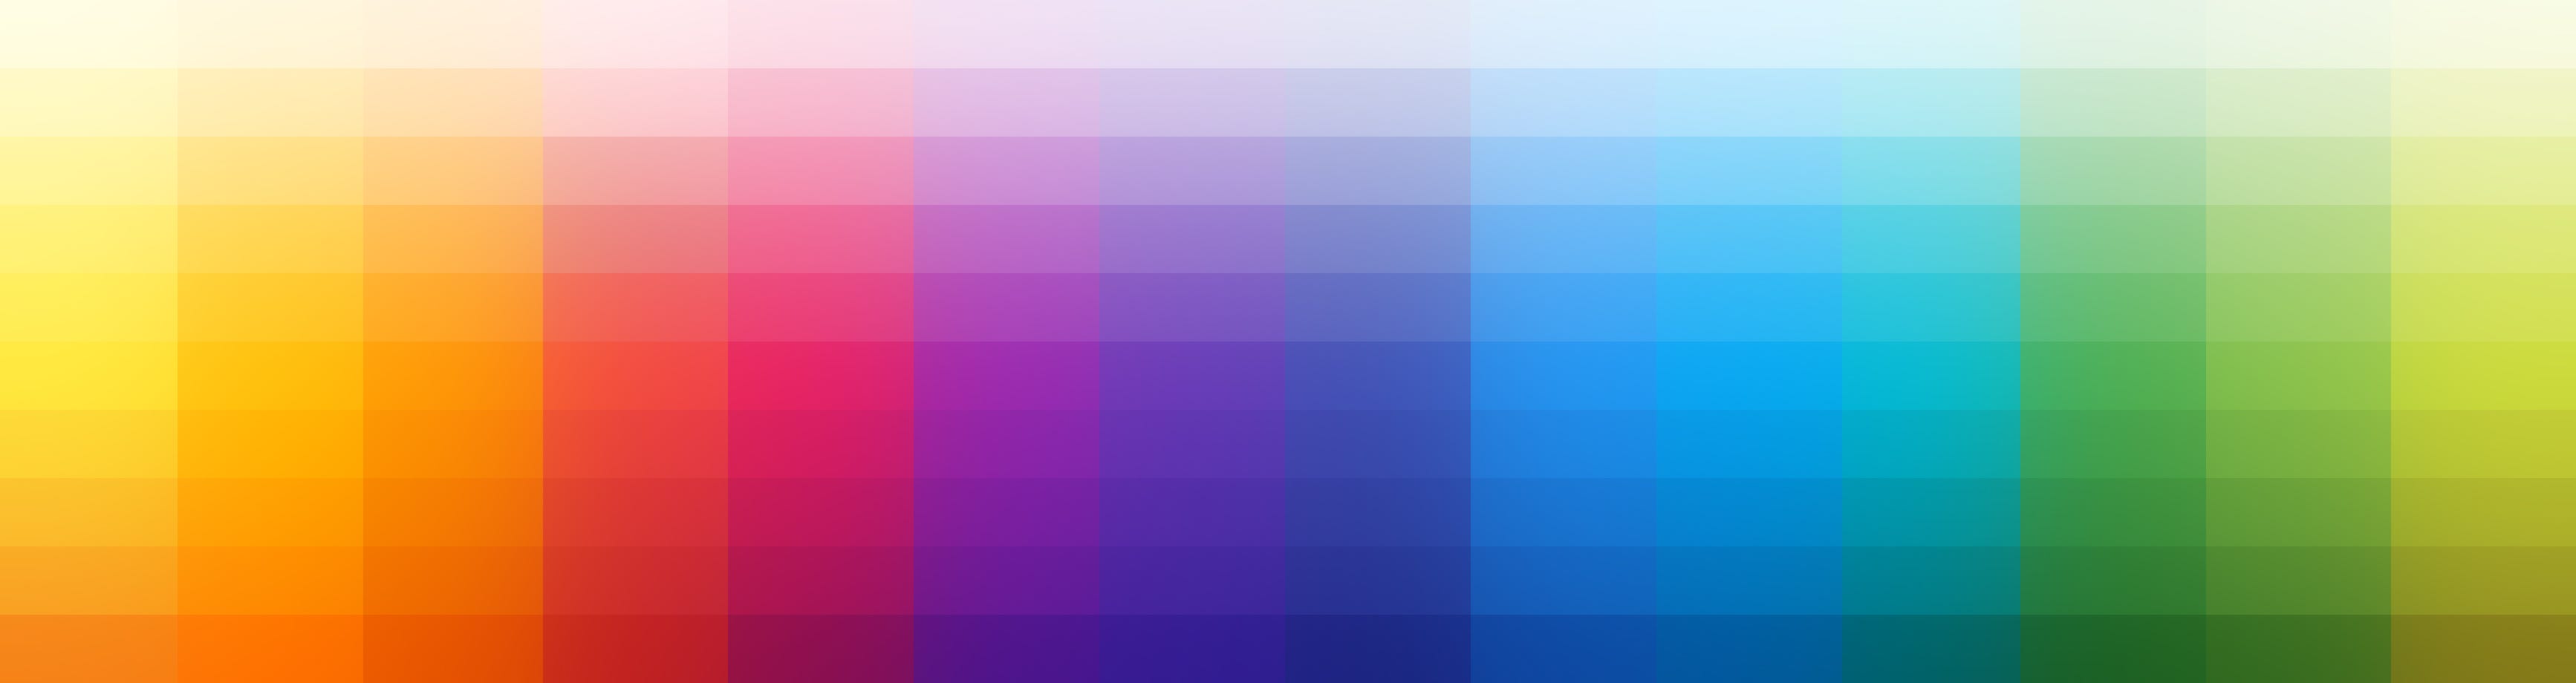 Import the Material Design color palette into Sketch 3 | by H | Medium